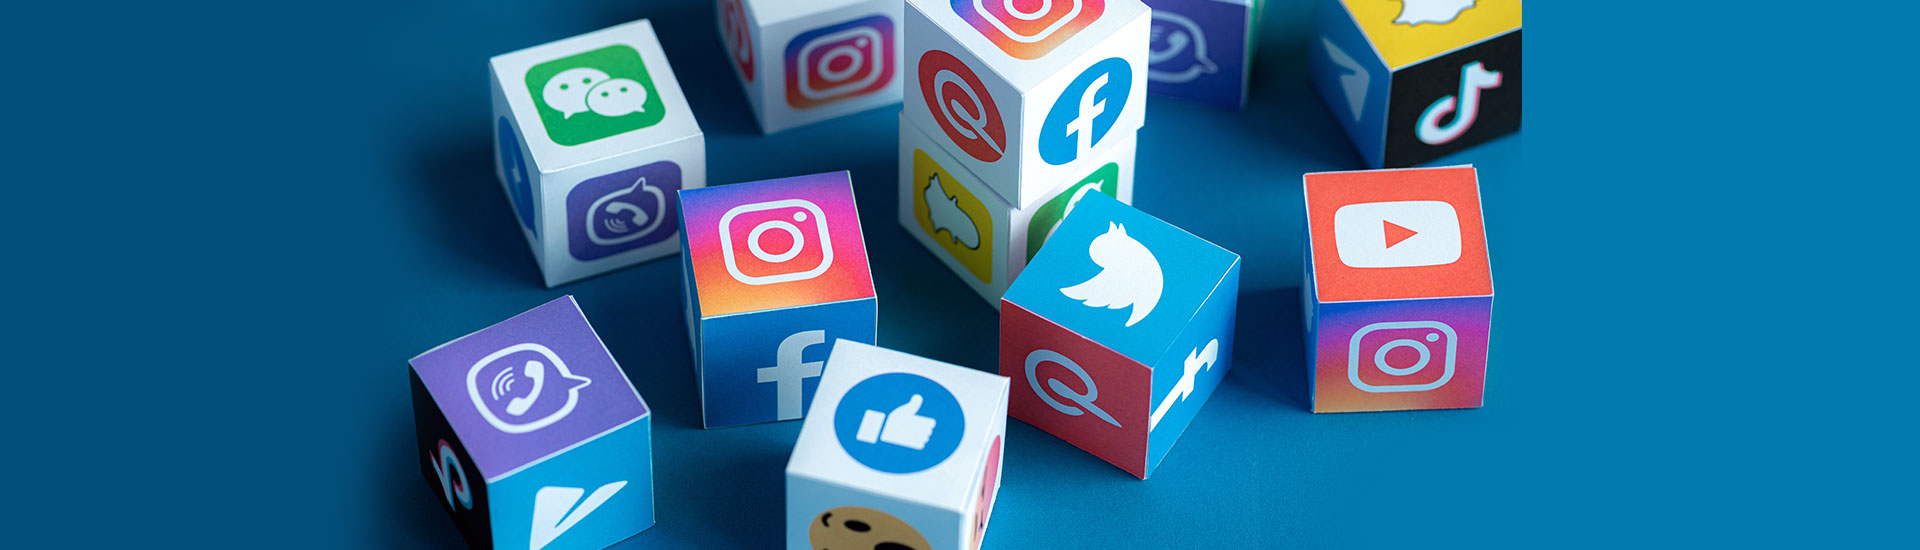 What will be the Social Media Trends for 2020